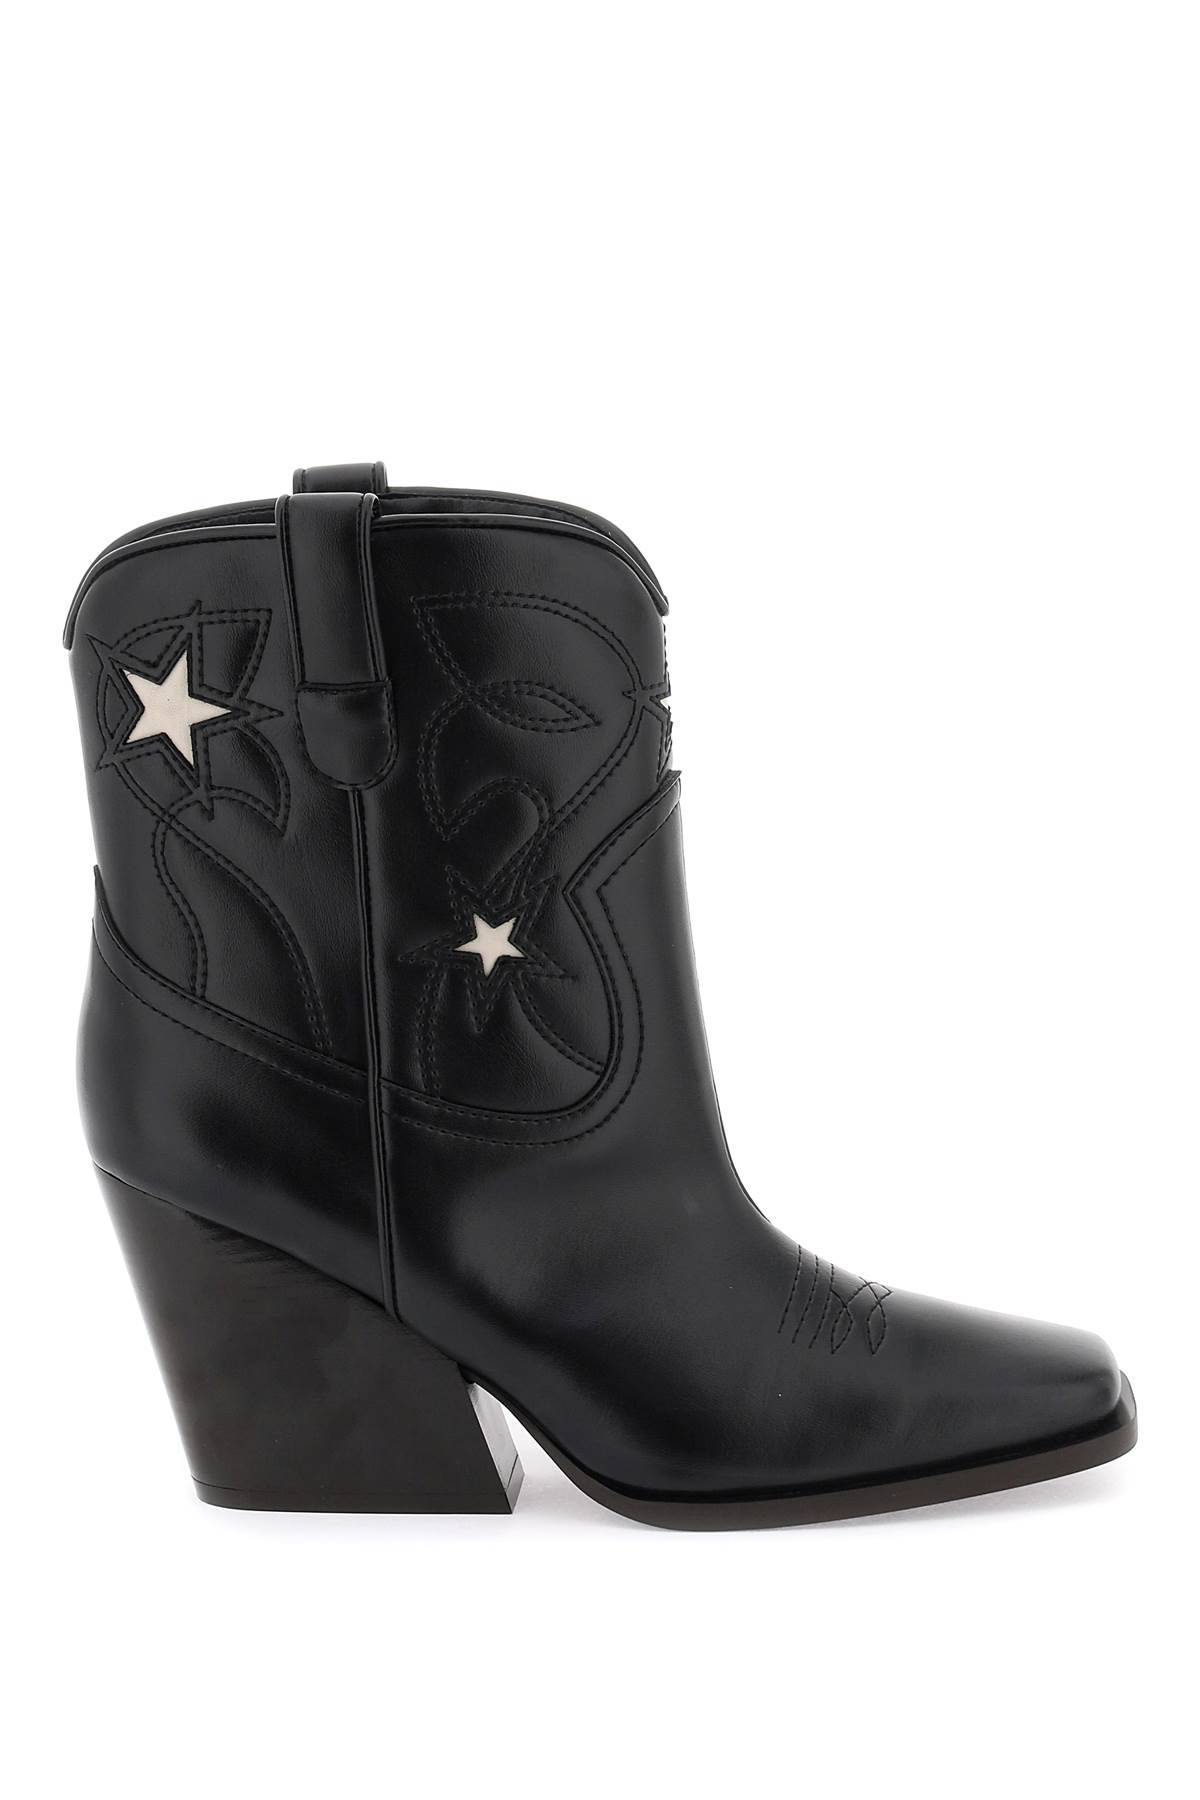 Stella Mccartney Texan Ankle Boots With Star Embroidery In Black